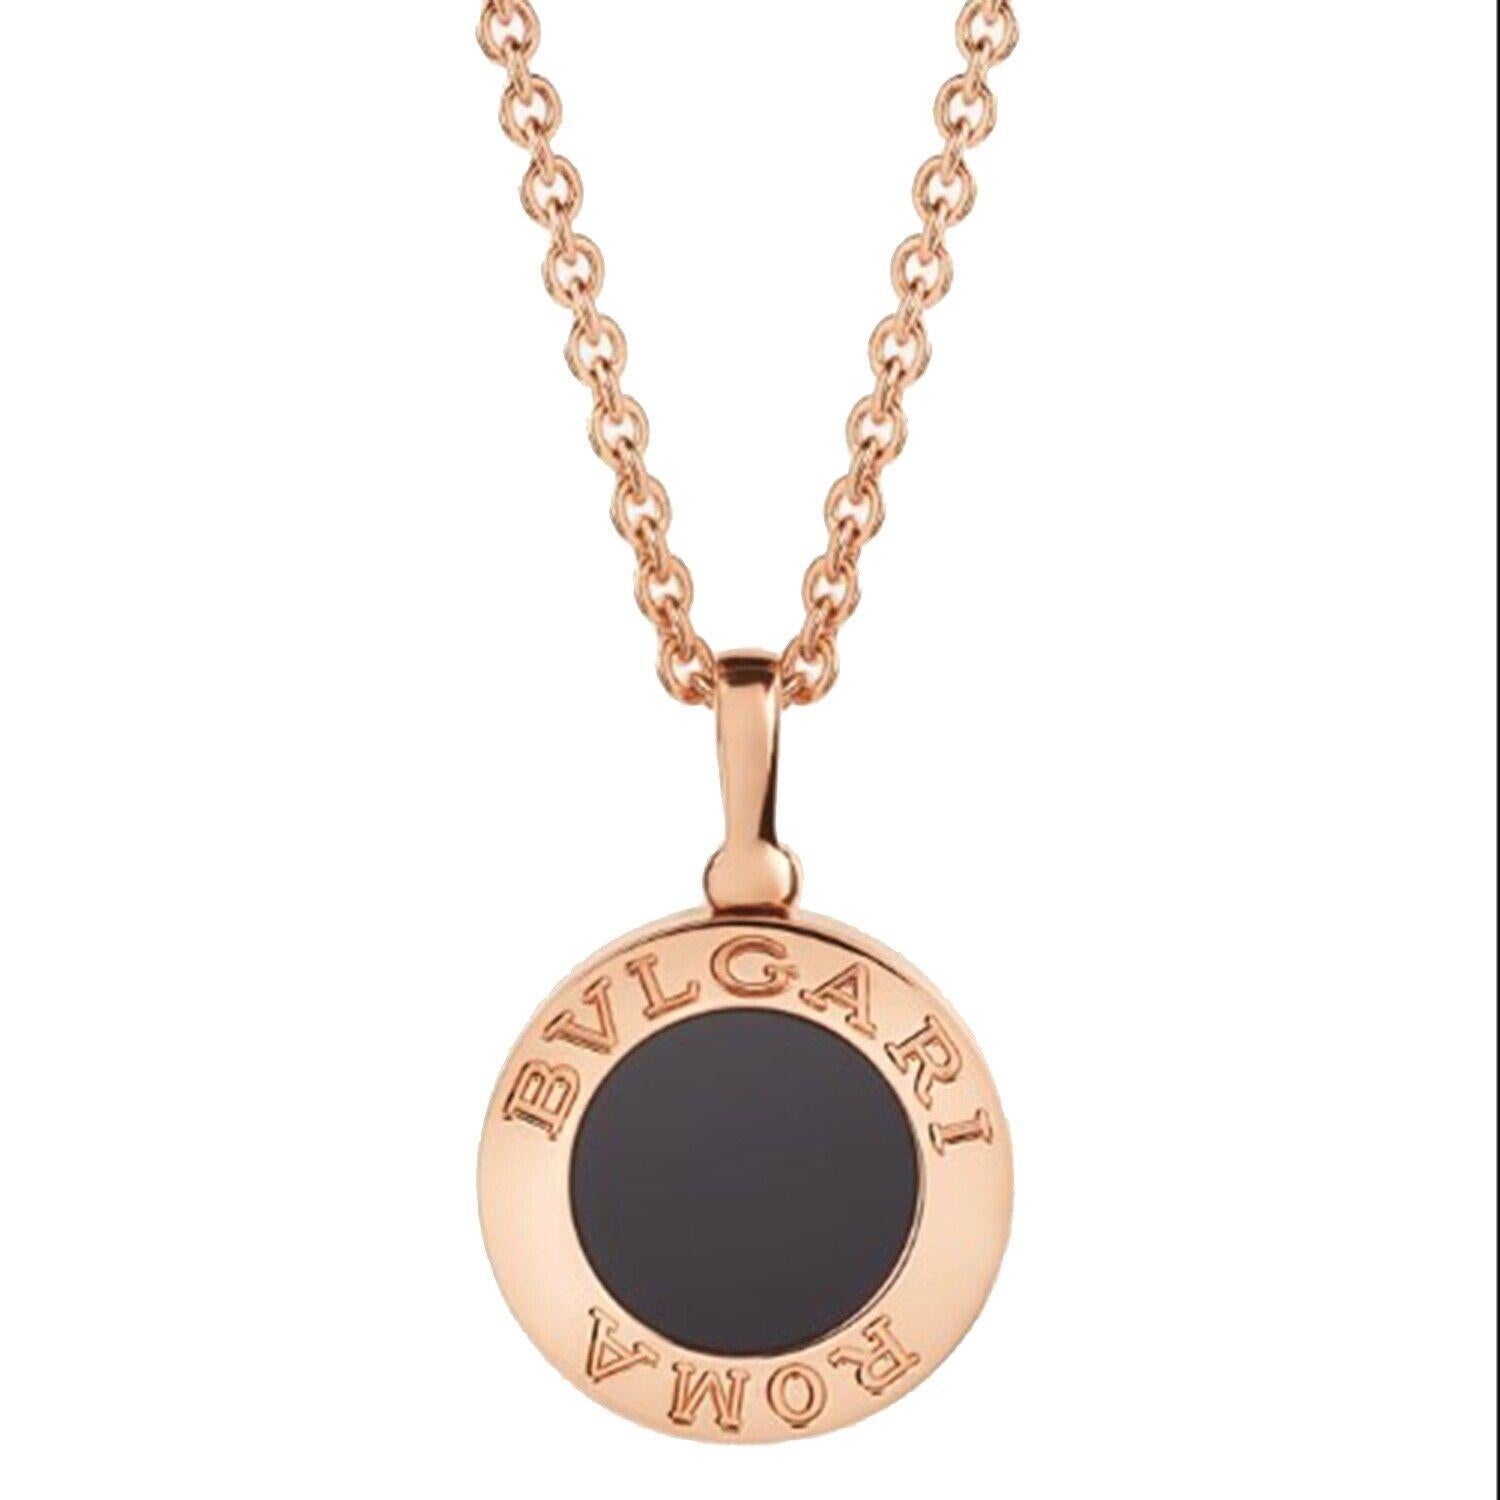 Designer: Bvlgari

Collection: Bvlgari Bvlgari 

REF: 310815

Style: Double Sided Pendant Necklace

Metal: Rose Gold

Metal Purity: 18K

Necklace Length: 16.14-16.92 inches 

Stones: Diamond ; Onyx 

​​​​​​​Total Carat Weight :0.34